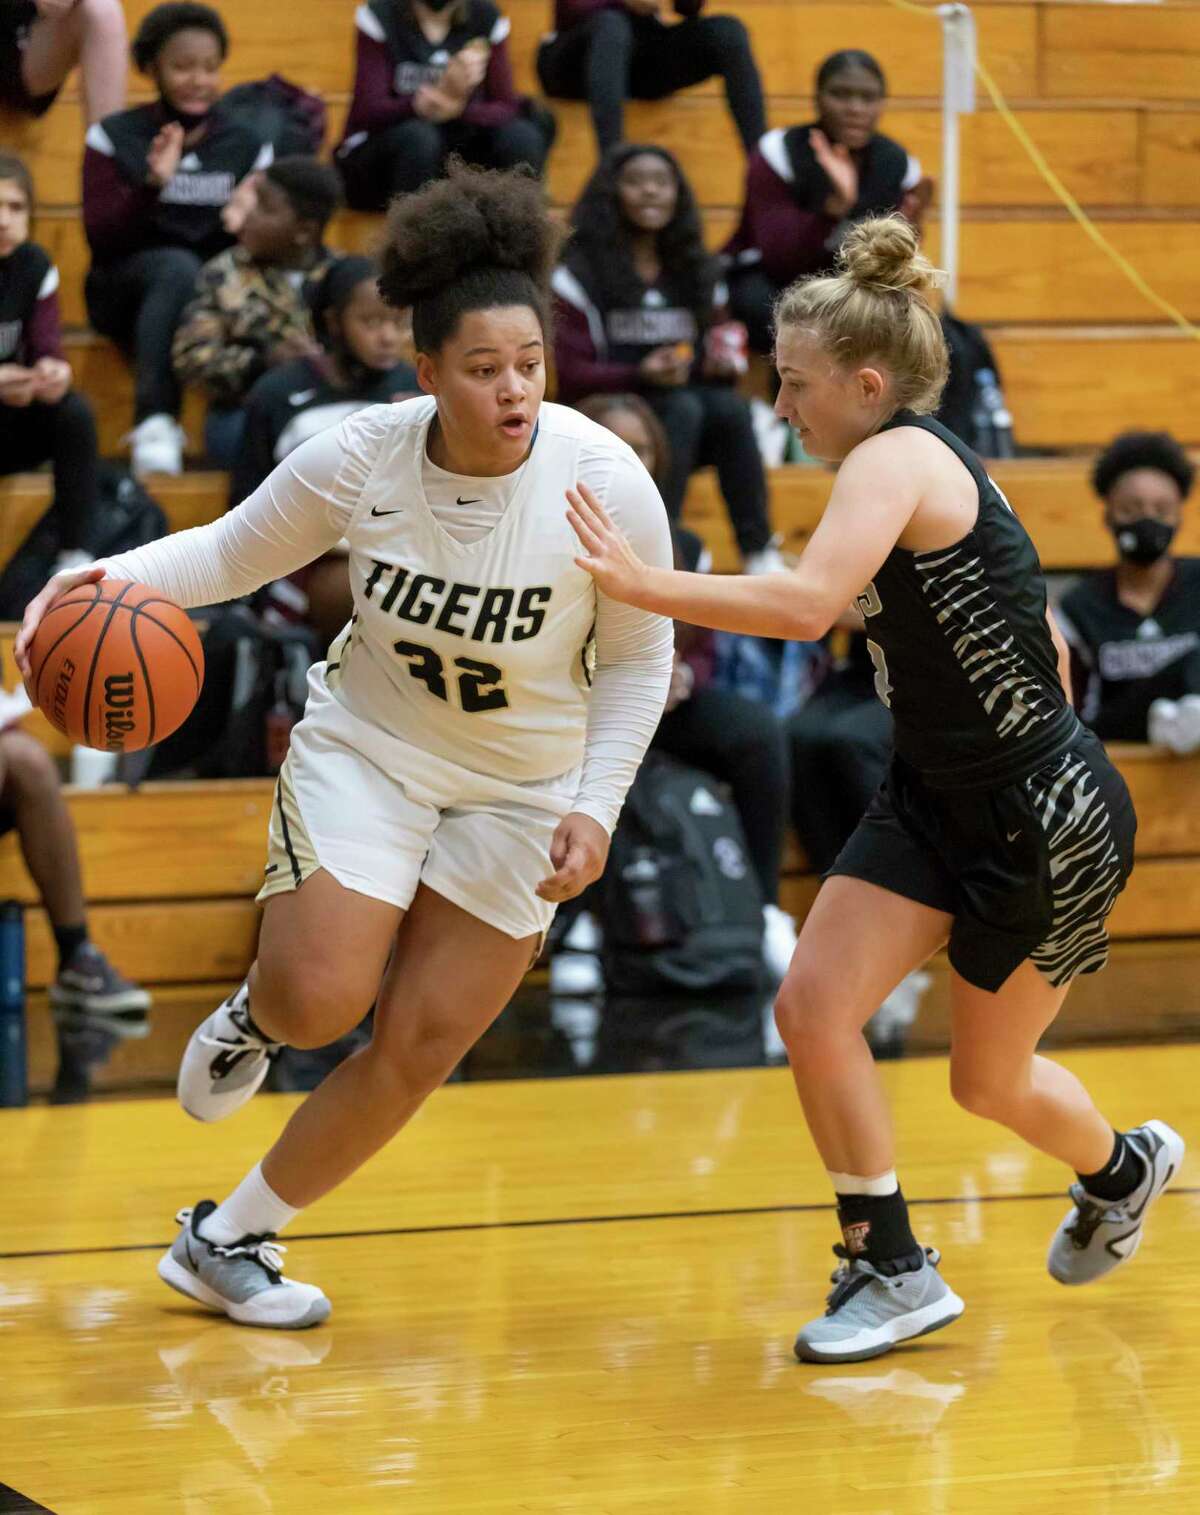 Conroe junior Isabella Stafford (32) looks for an opening to drive the ball passed A&M Consolidated Claire Sisco (4) during the first quarter of a non-district high school basketball game at Conroe High School, Tuesday, Nov. 17, 2020, in Conroe.